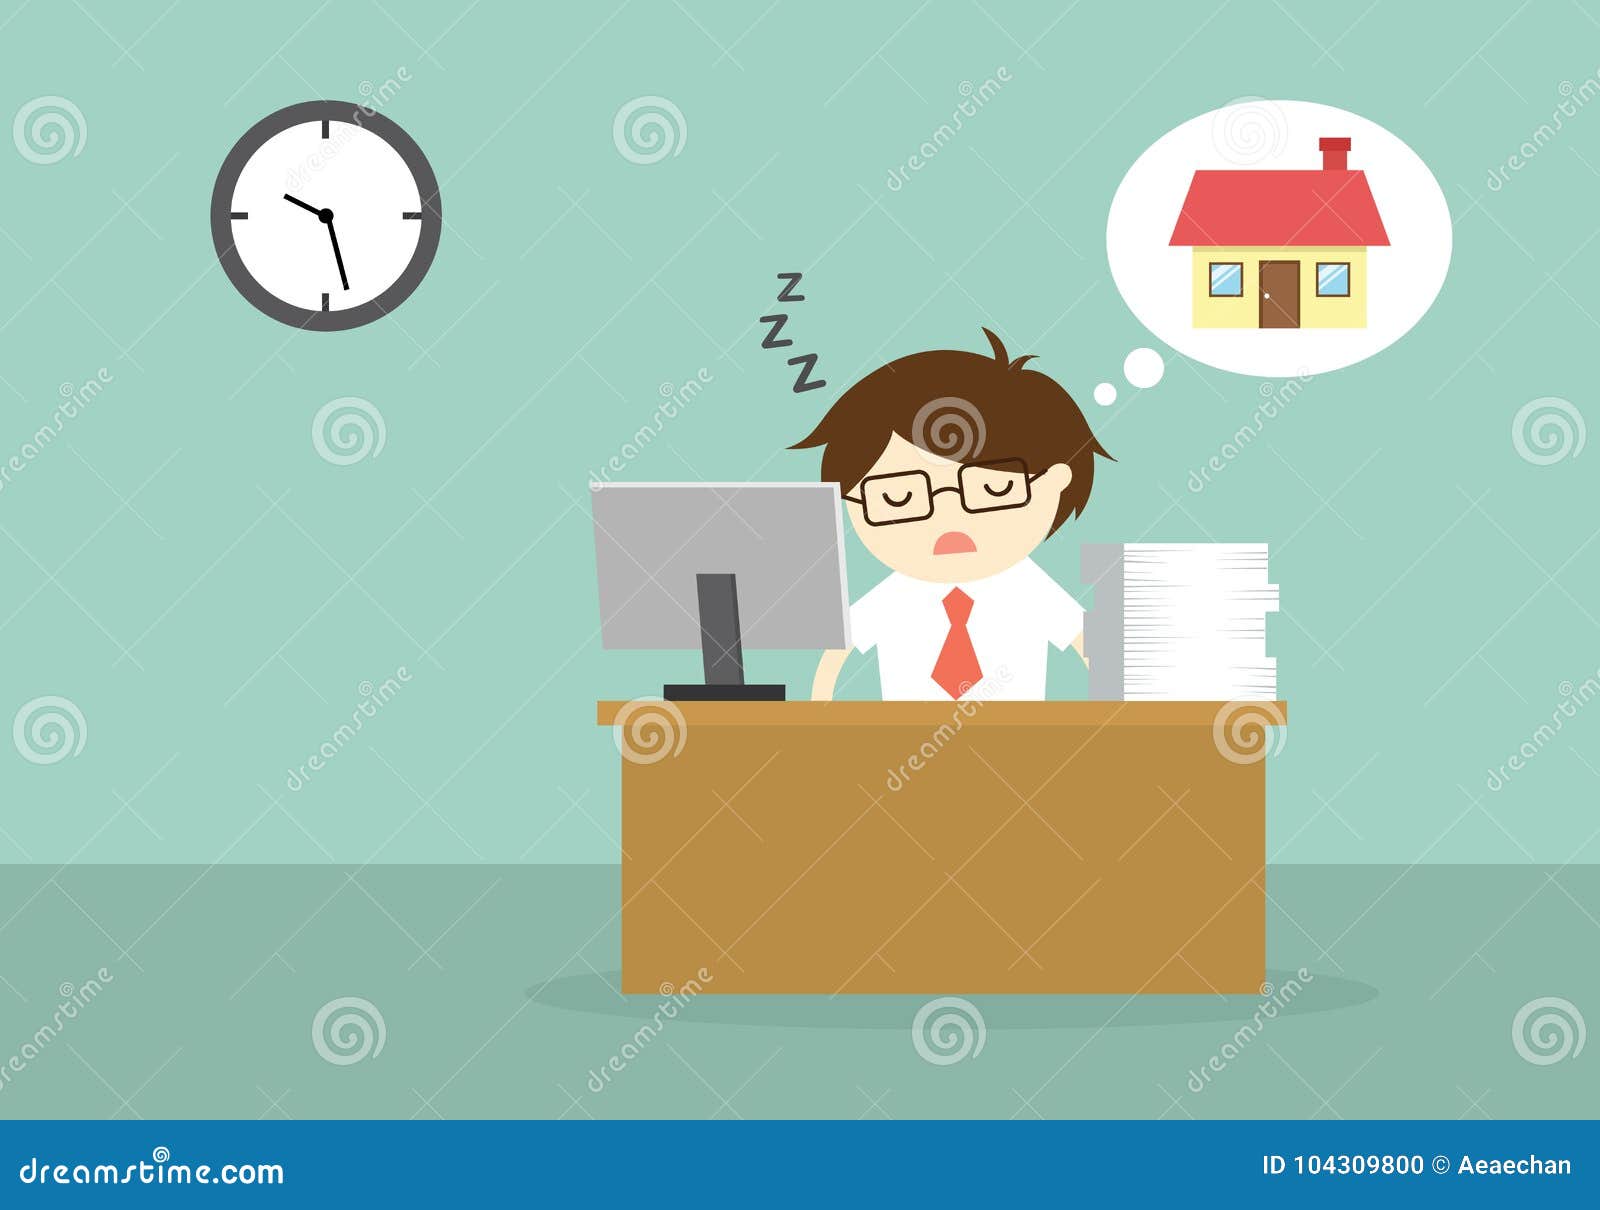 Time To Go Home Stock Illustrations 106 Time To Go Home Stock Illustrations Vectors Clipart Dreamstime